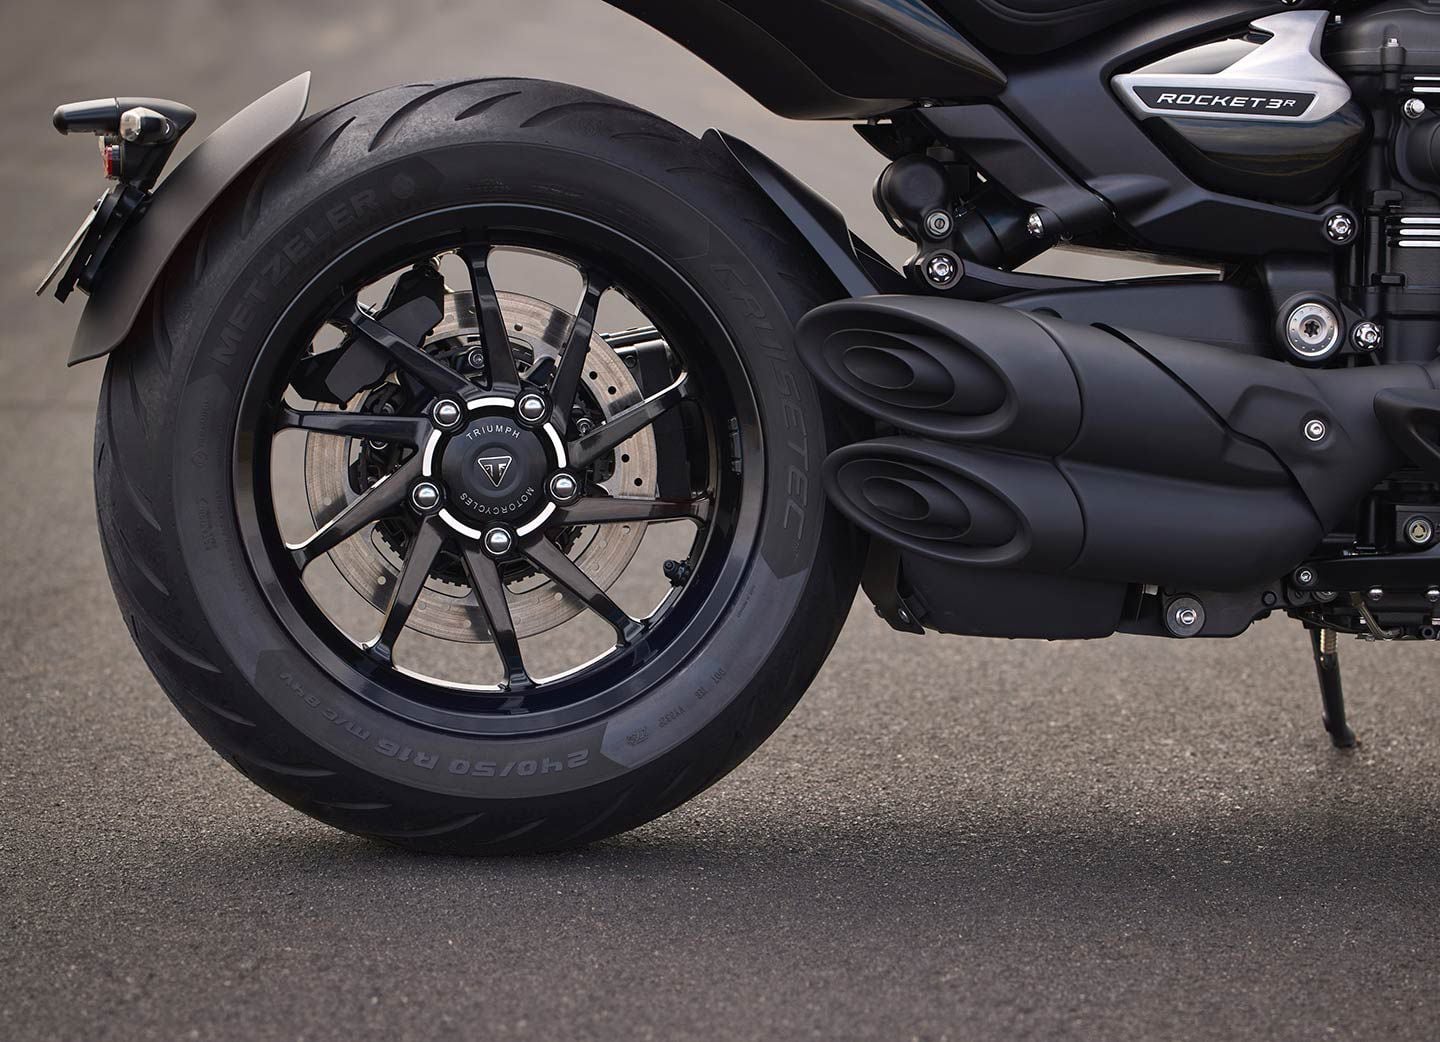 The Storm models feature new, lighter-weight cast aluminum wheels, though they are the same dimensions as the previous model. Metzeler Cruisetec rubber is also new this year.